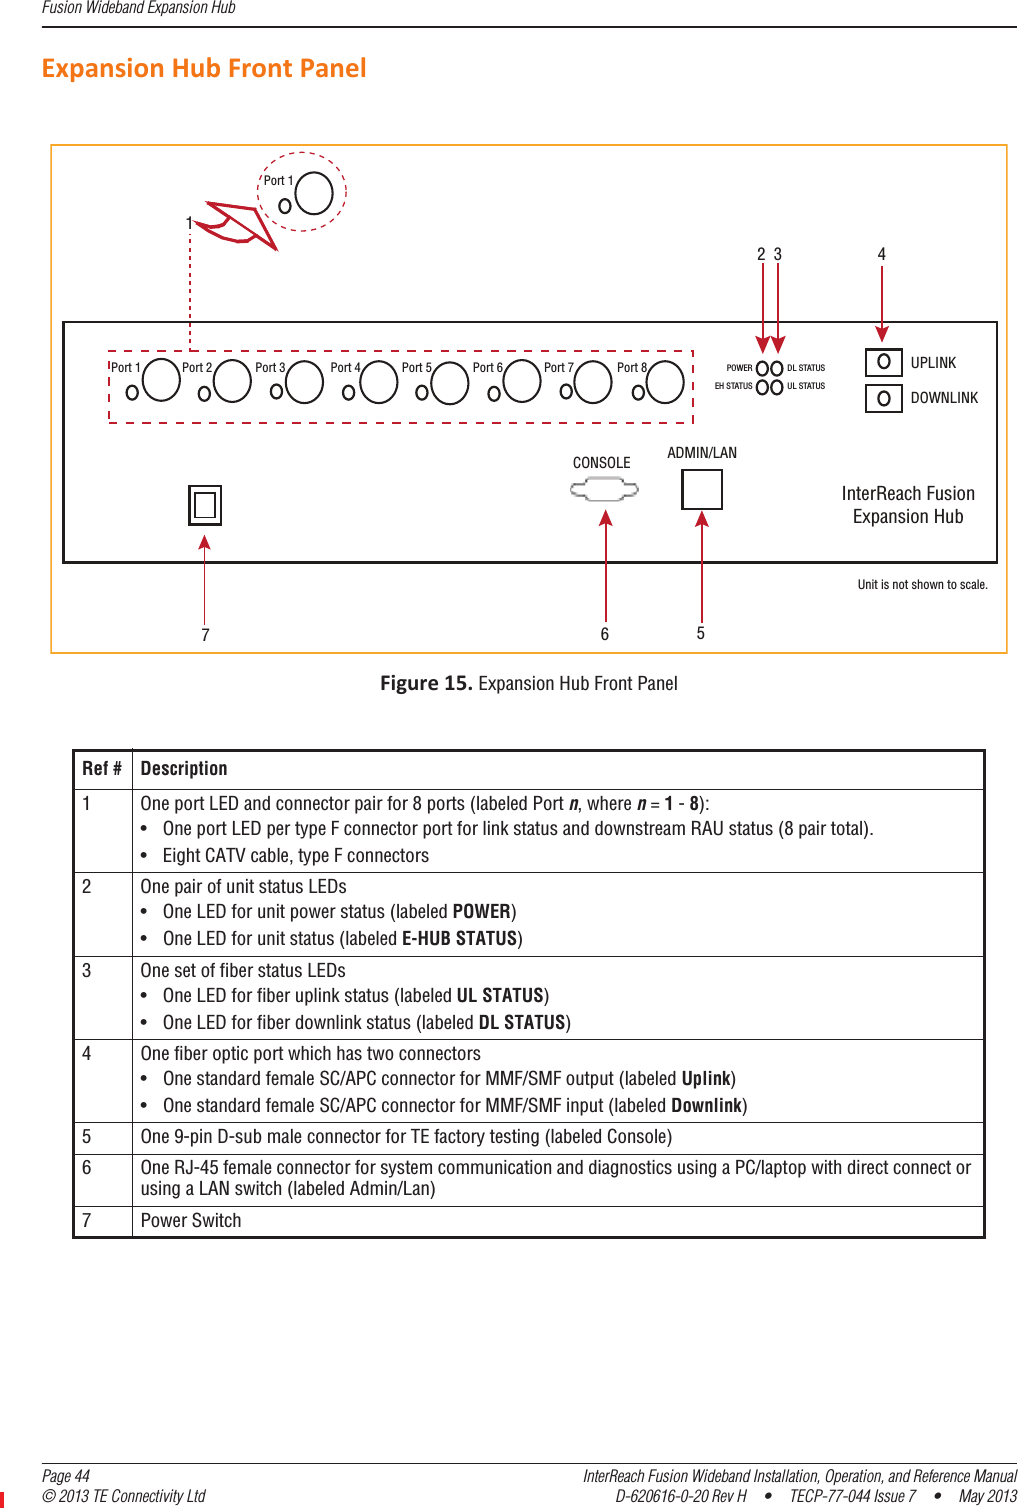 Fusion Wideband Expansion Hub  Page 44 InterReach Fusion Wideband Installation, Operation, and Reference Manual© 2013 TE Connectivity Ltd D-620616-0-20 Rev H  •  TECP-77-044 Issue 7  •  May 2013ExpansionHubFrontPanelFigure15.Expansion Hub Front PanelRef # Description1 One port LED and connector pair for 8 ports (labeled Port n, where n = 1 - 8):• One port LED per type F connector port for link status and downstream RAU status (8 pair total).• Eight CATV cable, type F connectors 2 One pair of unit status LEDs• One LED for unit power status (labeled POWER)• One LED for unit status (labeled E-HUB STATUS)3 One set of fiber status LEDs• One LED for fiber uplink status (labeled UL STATUS)• One LED for fiber downlink status (labeled DL STATUS)4 One fiber optic port which has two connectors• One standard female SC/APC connector for MMF/SMF output (labeled Uplink)• One standard female SC/APC connector for MMF/SMF input (labeled Downlink)5 One 9-pin D-sub male connector for TE factory testing (labeled Console)6 One RJ-45 female connector for system communication and diagnostics using a PC/laptop with direct connect or using a LAN switch (labeled Admin/Lan)7 Power Switch1Unit is not shown to scale.Port 1CONSOLEPort 2 Port 3 Port 4 Port 5 Port 6 Port 7 Port 8UPLINKDOWNLINKInterReach FusionExpansion HubADMIN/LANPOWEREH STATUSDL STATUSUL STATUSPort 12 3 4567